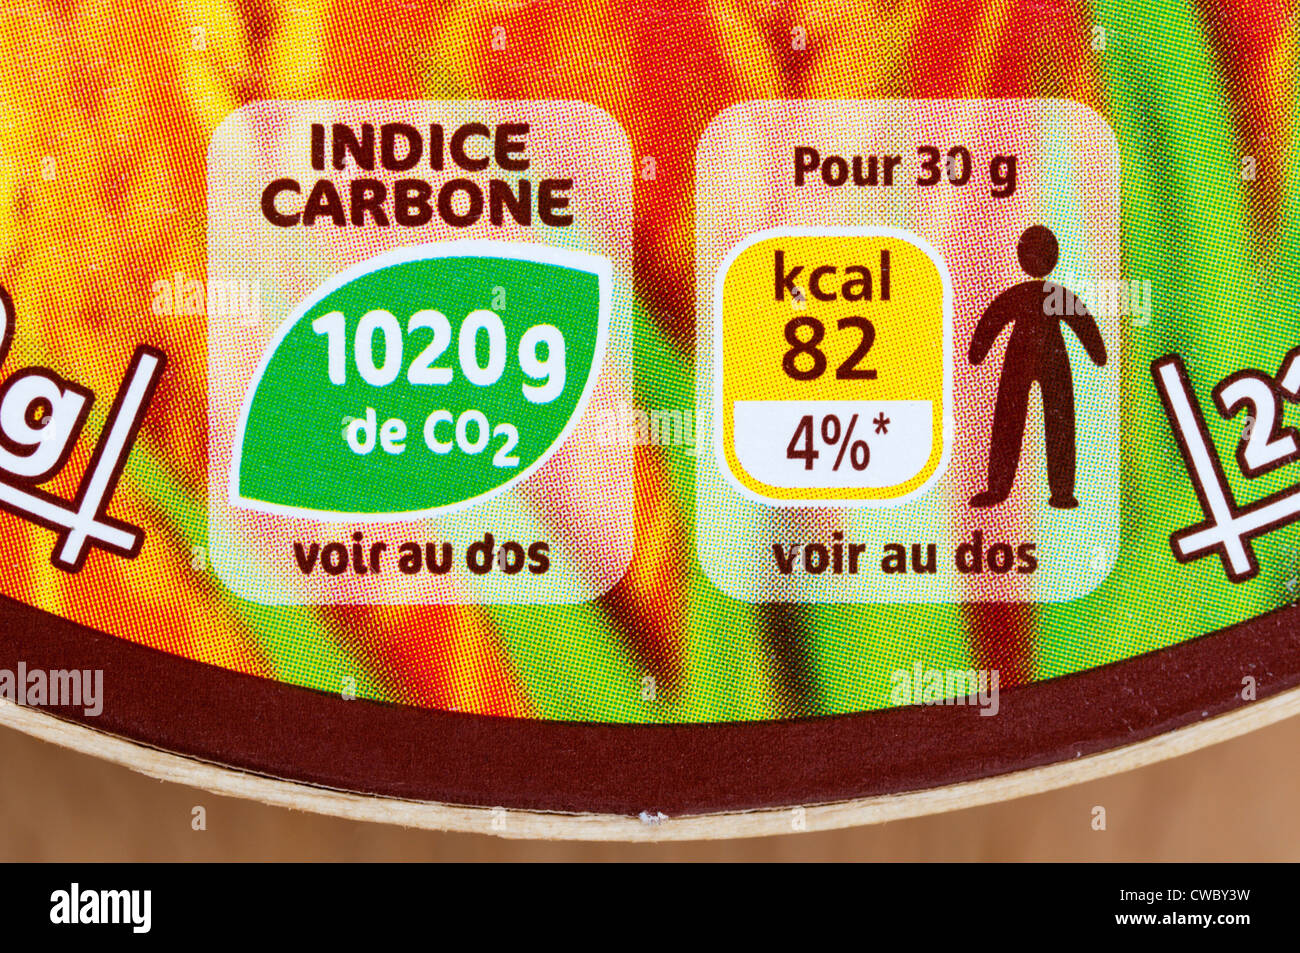 Indice Carbone or Carbon Index on the packaging of food from a French supermarket. Stock Photo